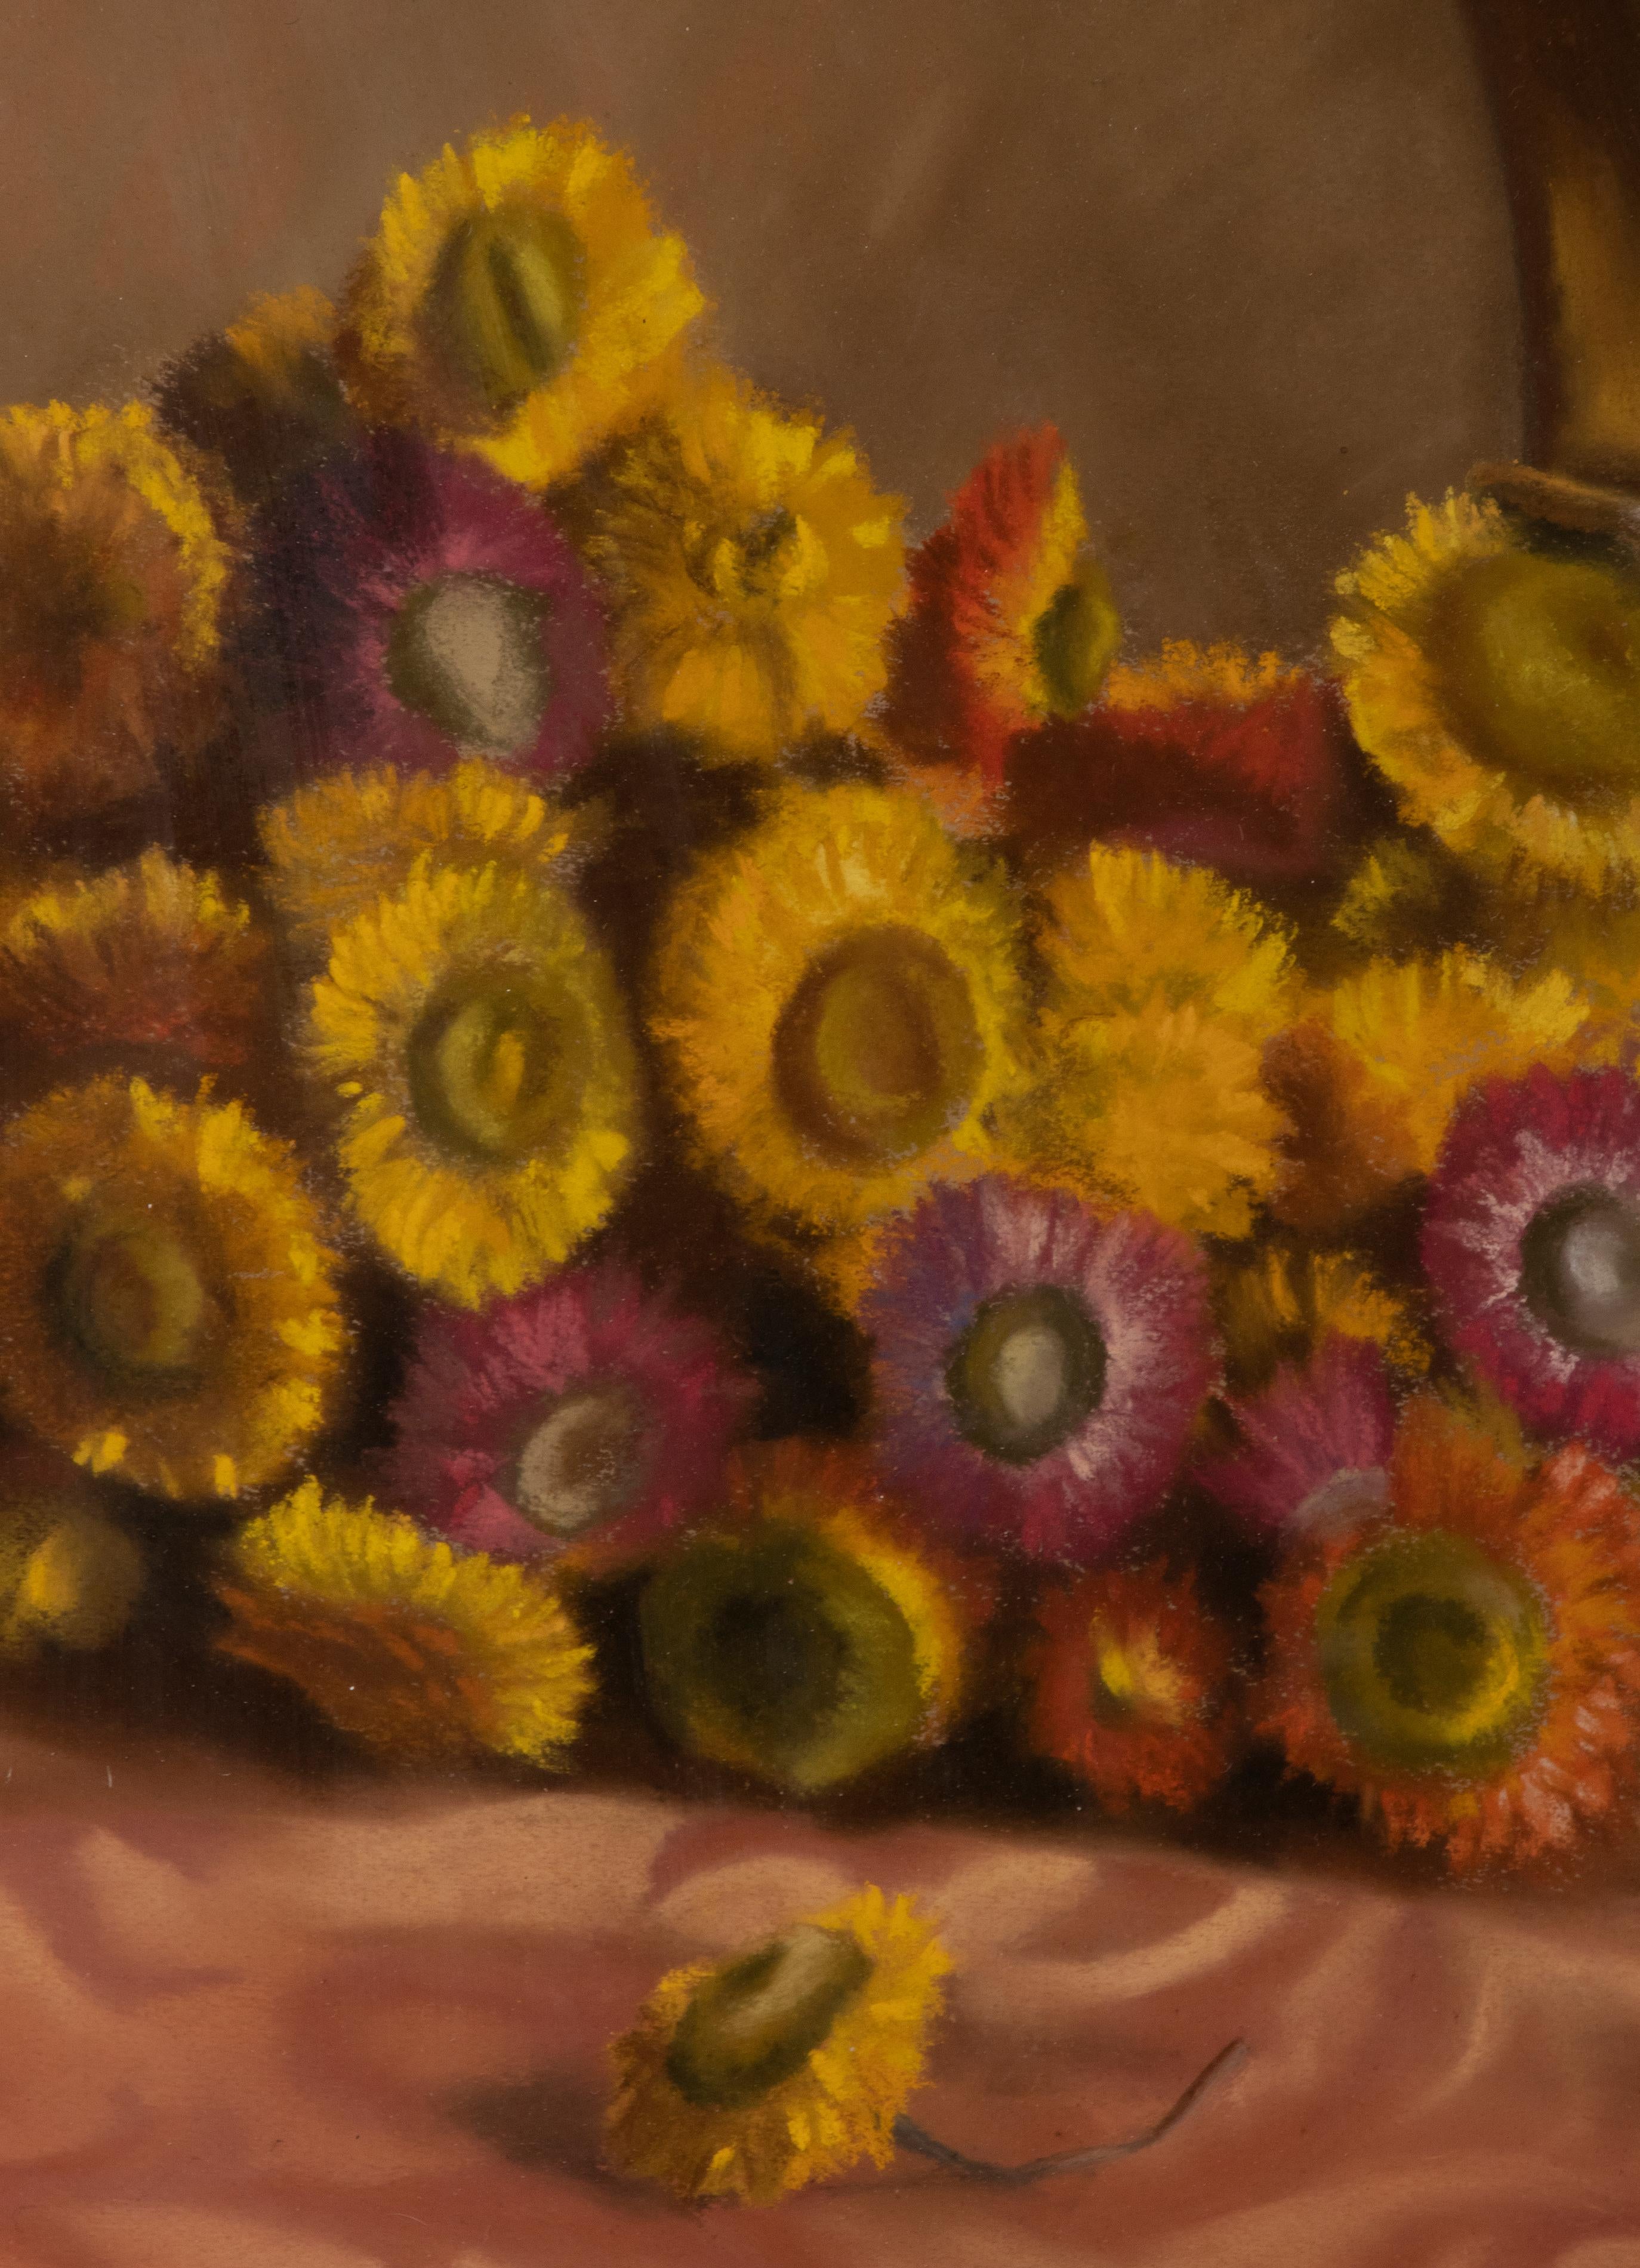 Romantic Mid 20th Century Flower Still Life in Pastel on Board Paintin by Simone Dujardin For Sale